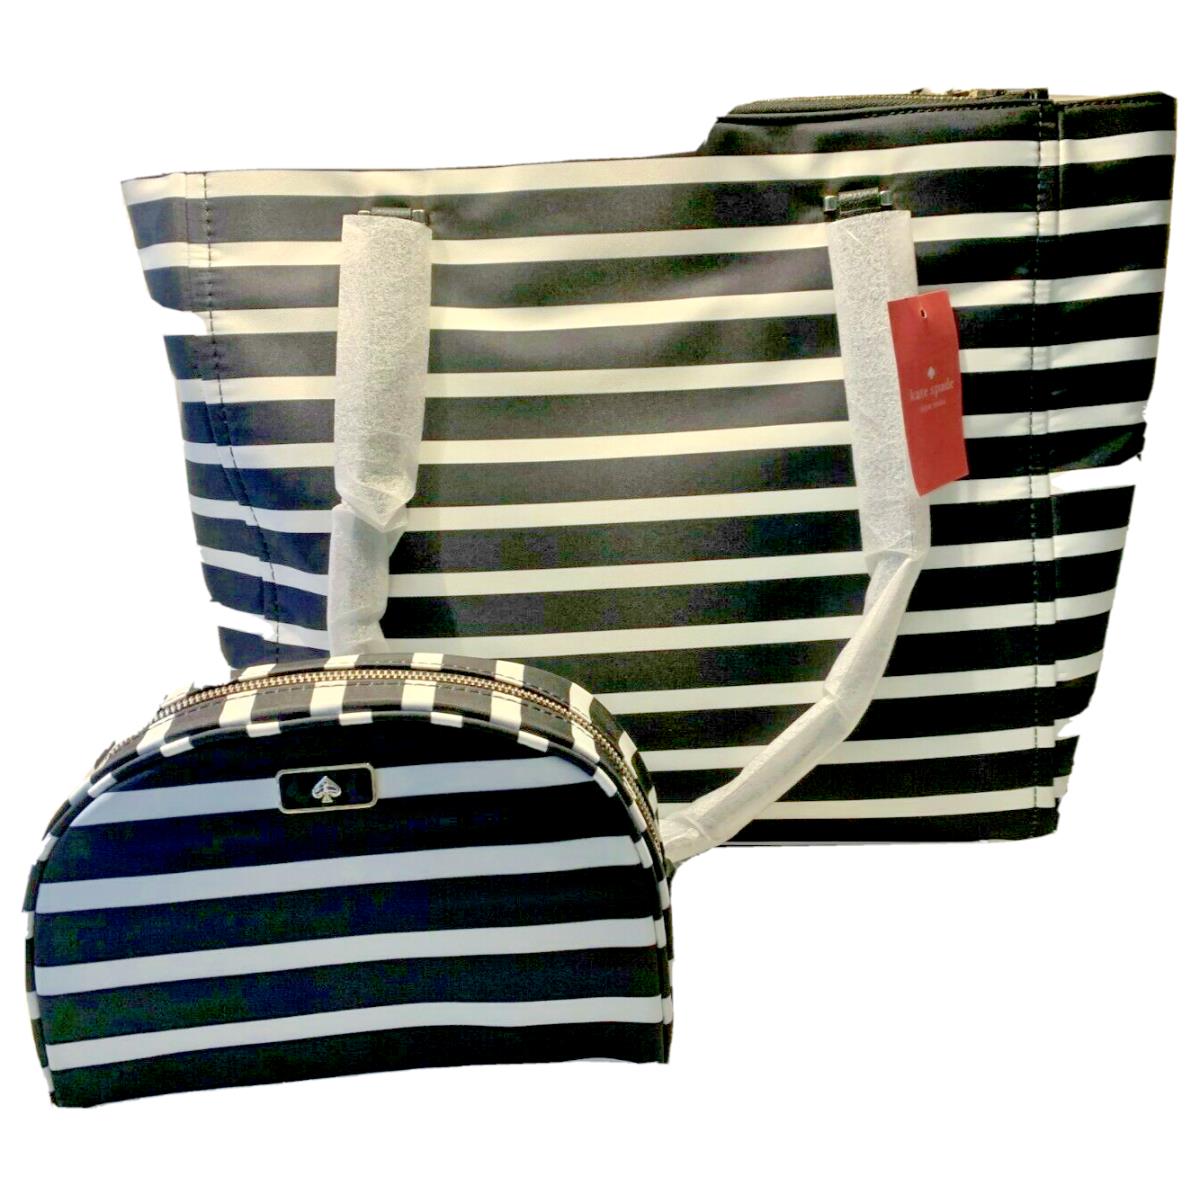 New-with-tag Kate Spade Dawn Sailing Stripe Tote Dome Cosmetic Bag